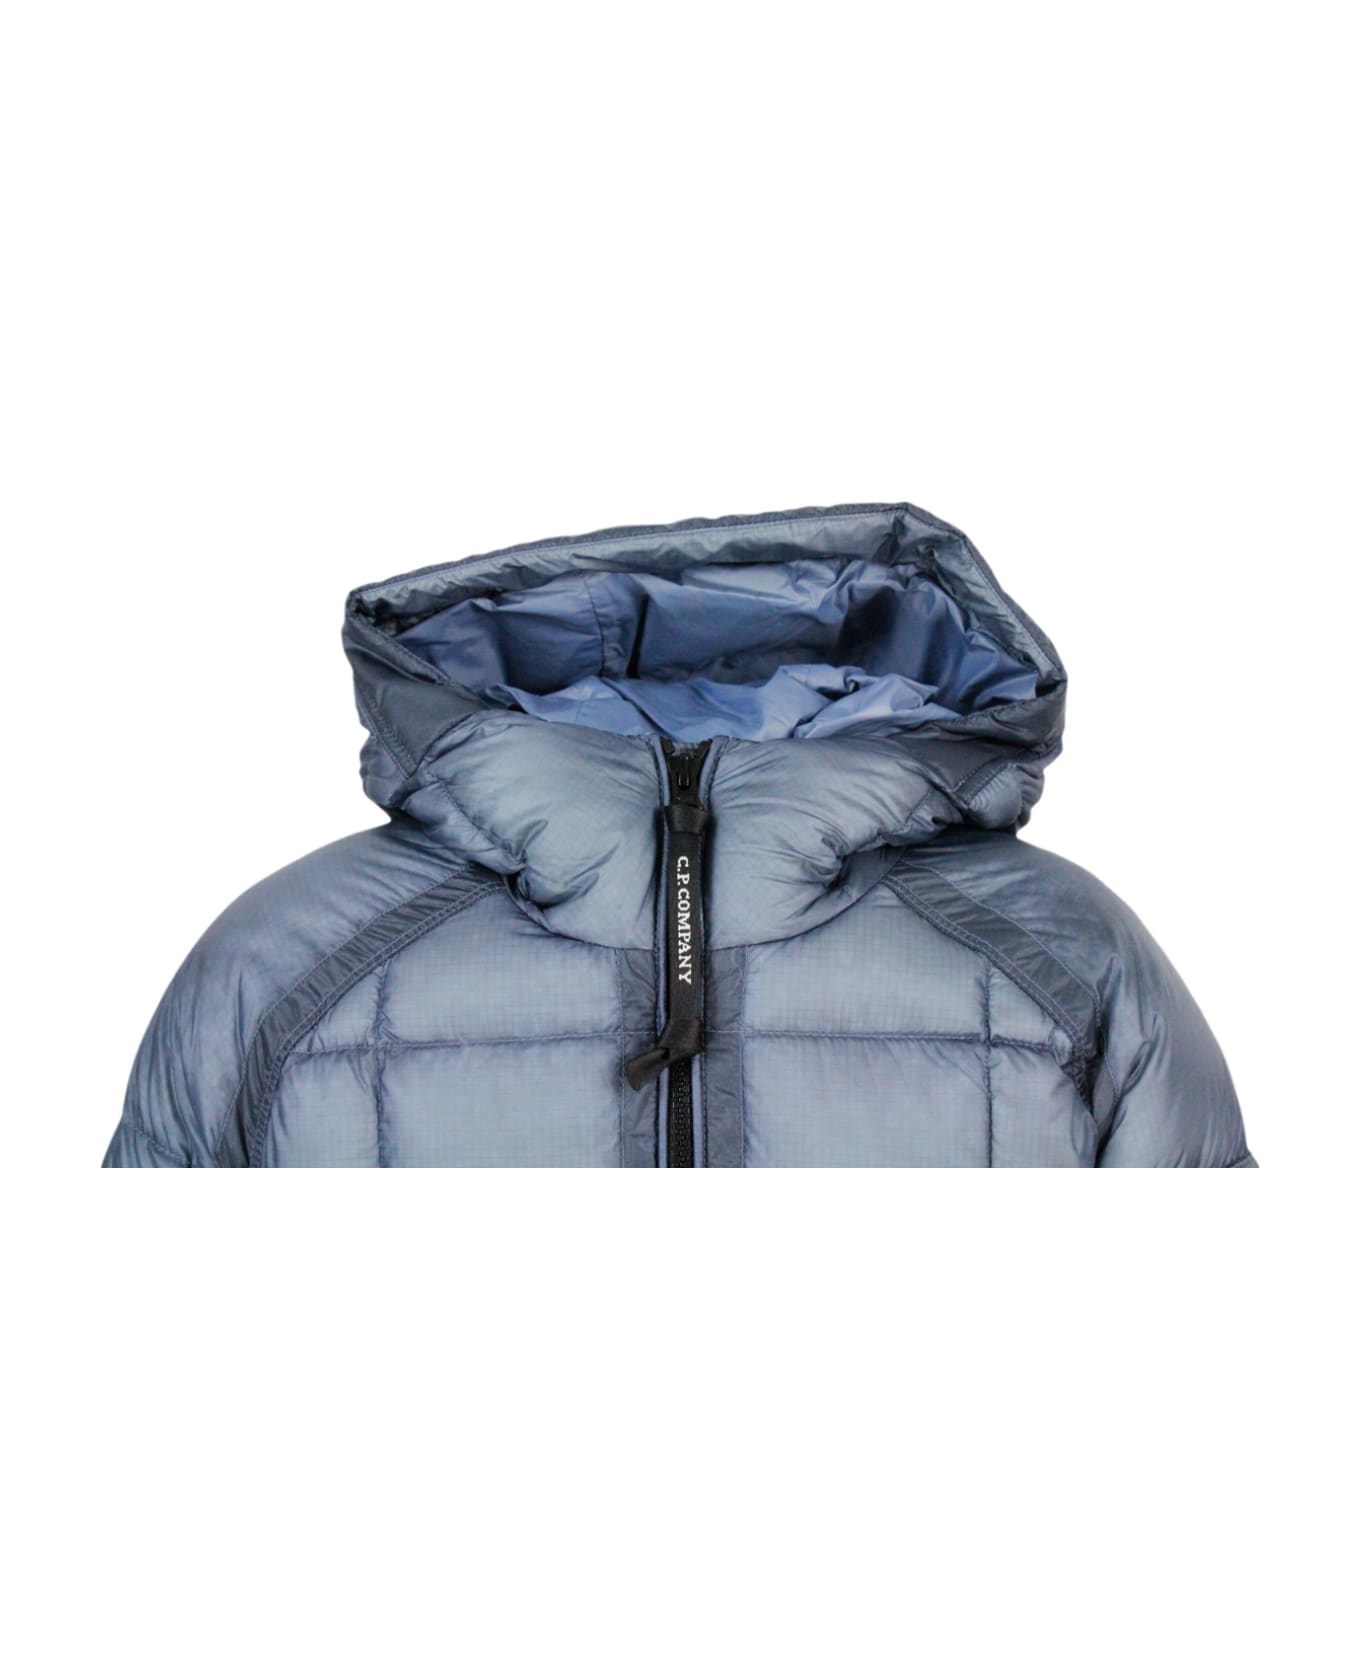 C.P. Company Dd Shell Down Jacket In Real Goose Down In Ultralight Fabric With Checkered Texture. - Blu コート＆ジャケット